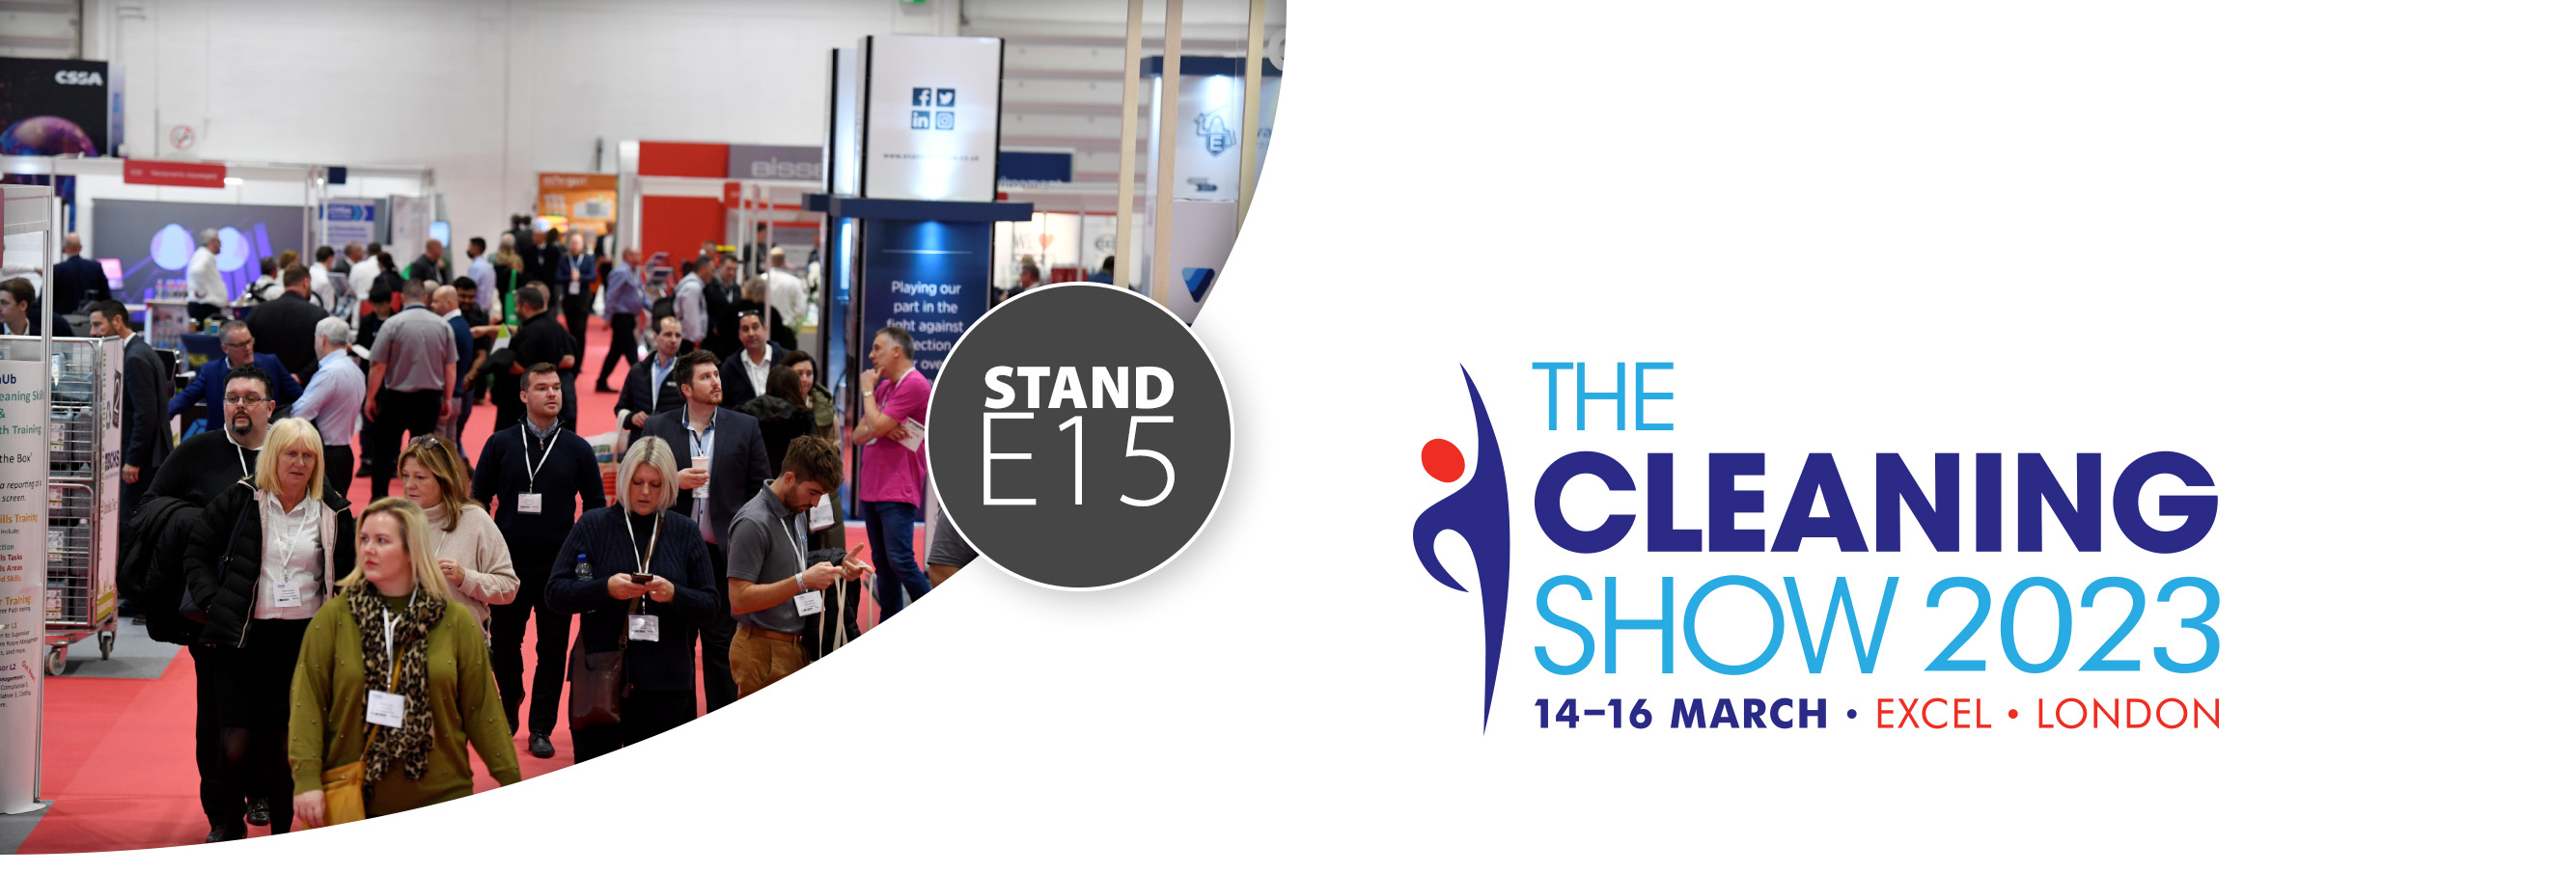 Register free for The Cleaning Show 2023